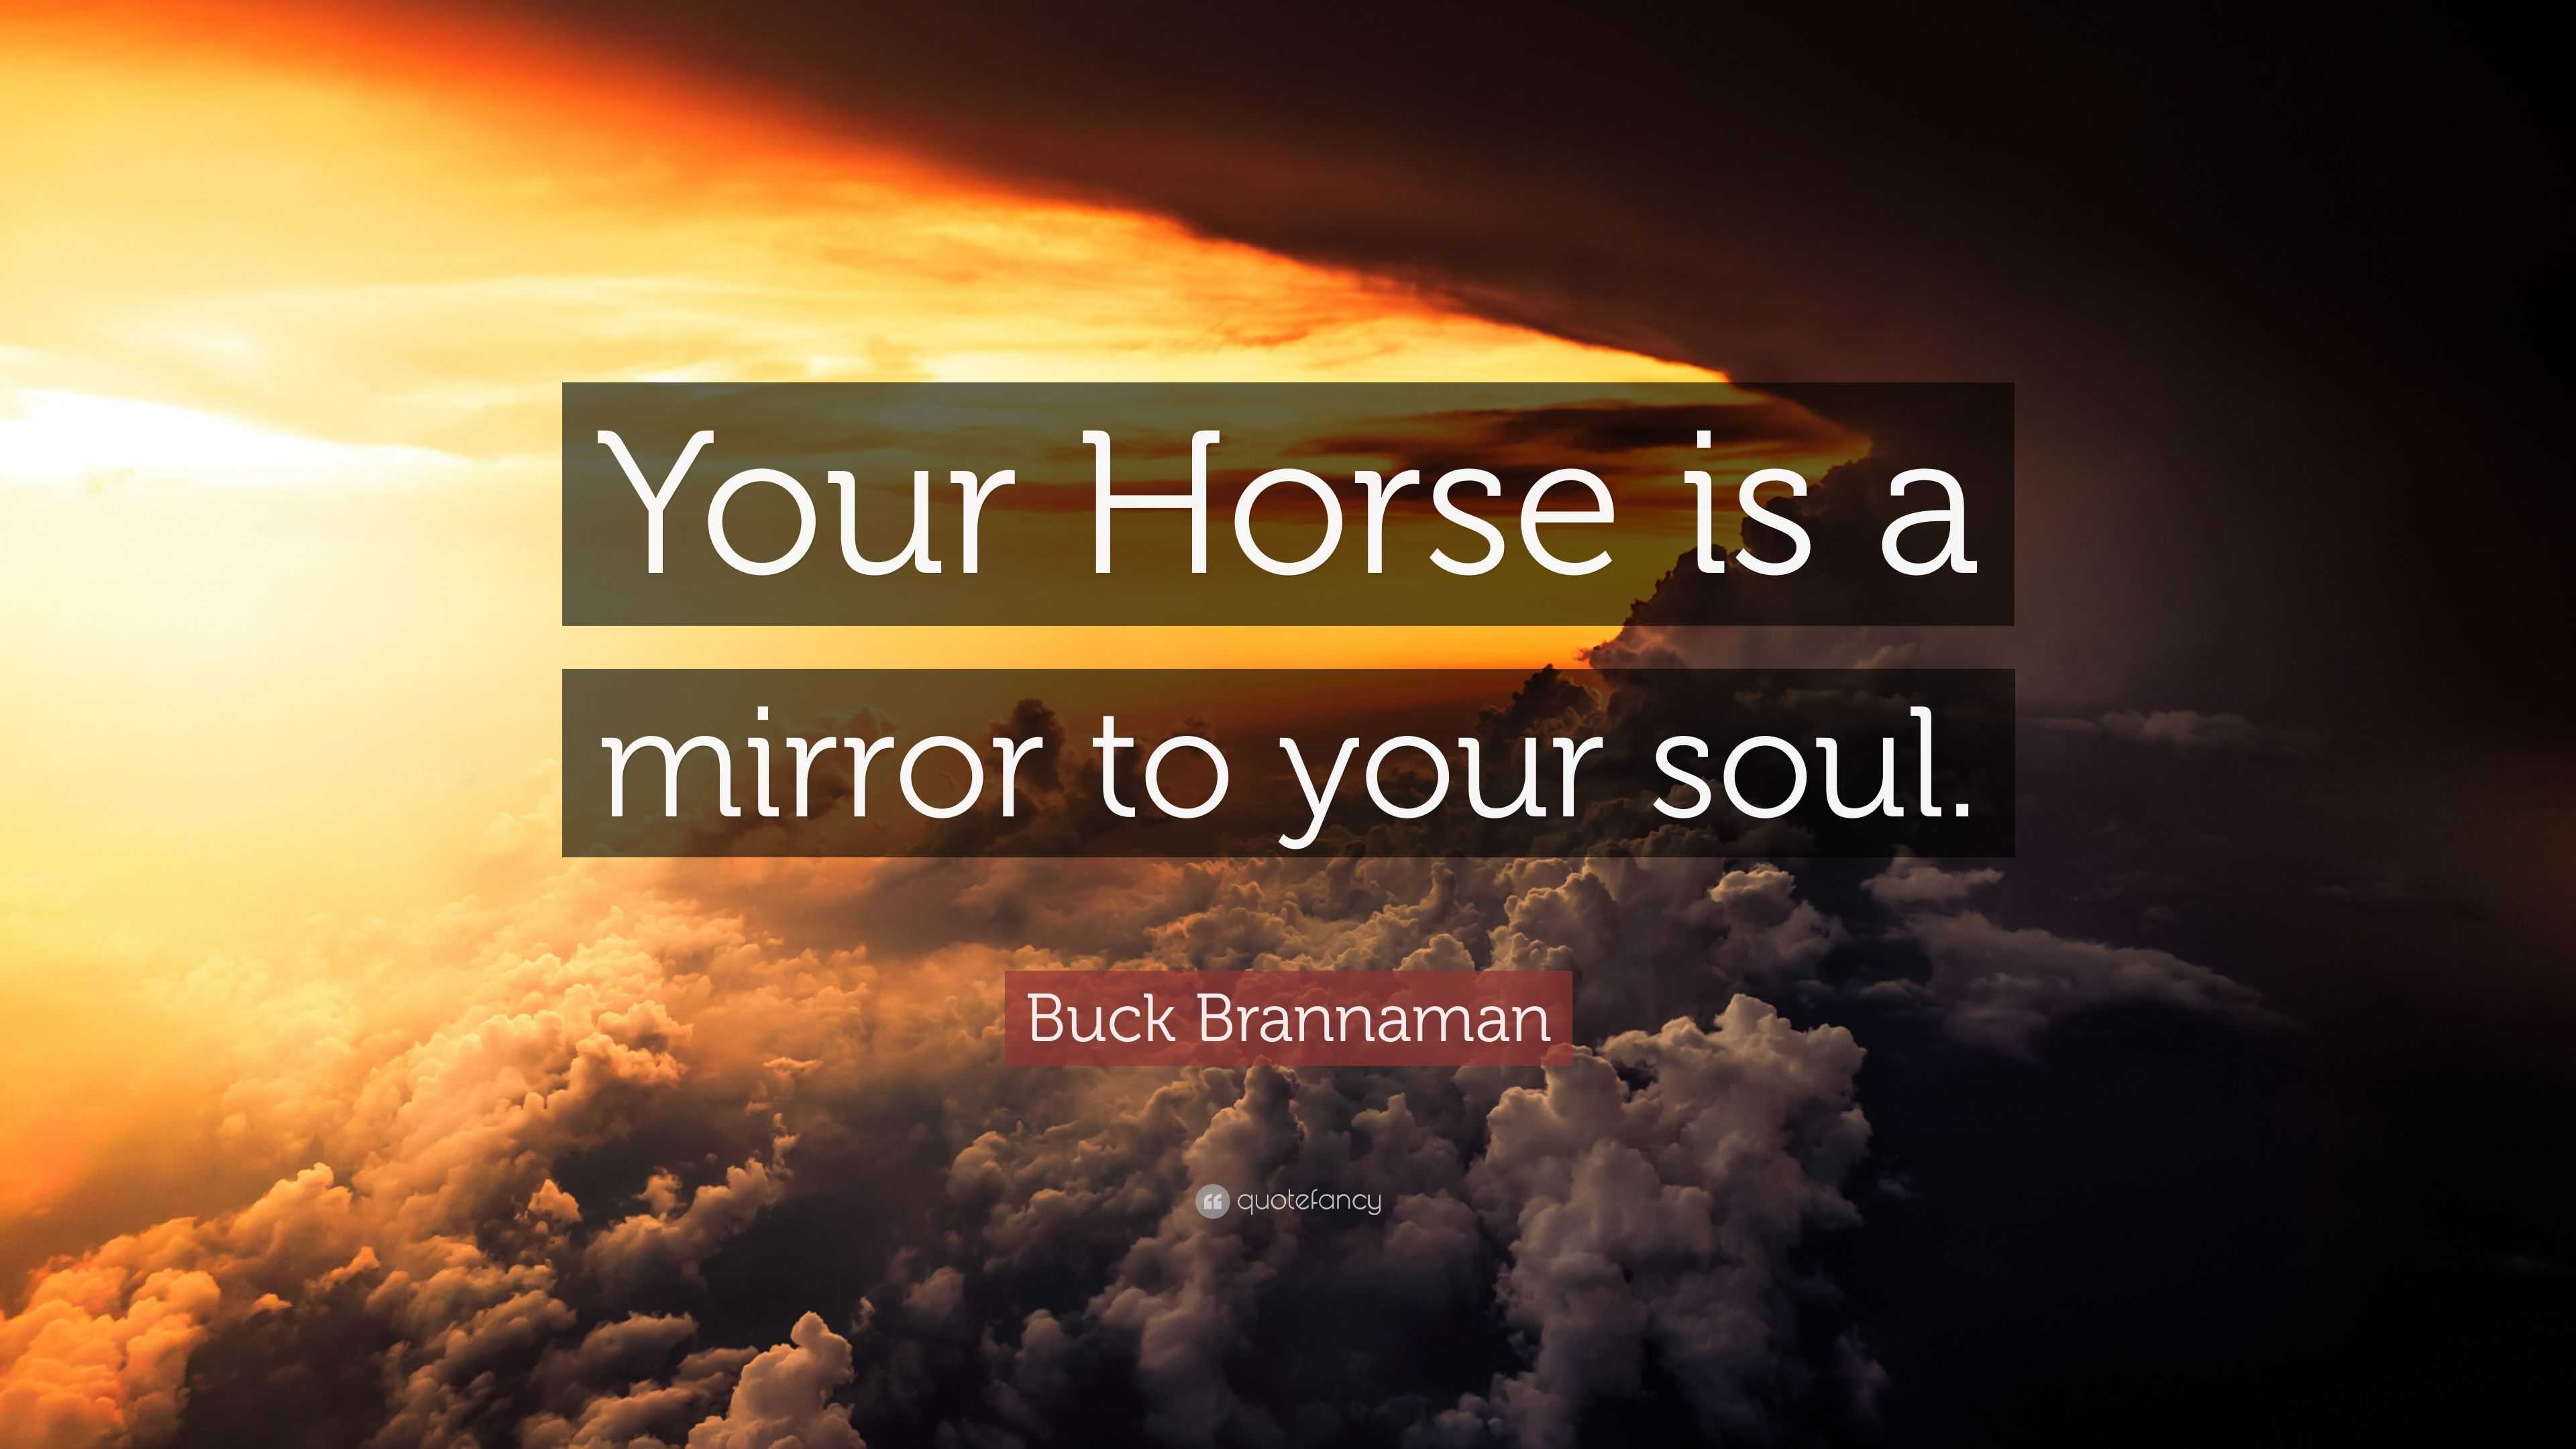 Buck Brannaman Quote: "Your Horse is a mirror to your soul." (7 wallpapers) - Quotefancy